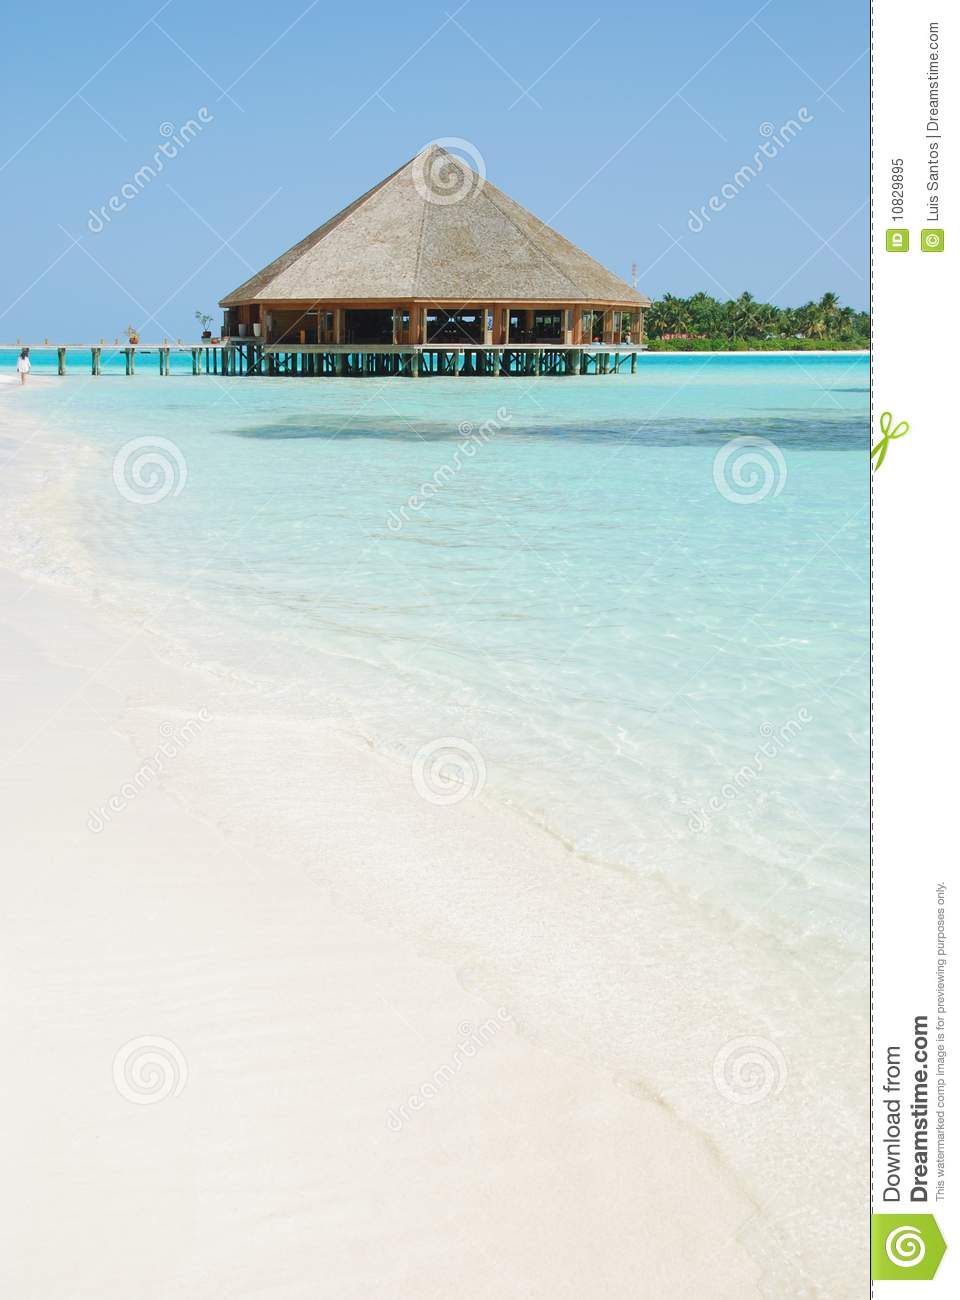 Bungalow At The Beach Royalty Free Stock Photo   Image  10829895